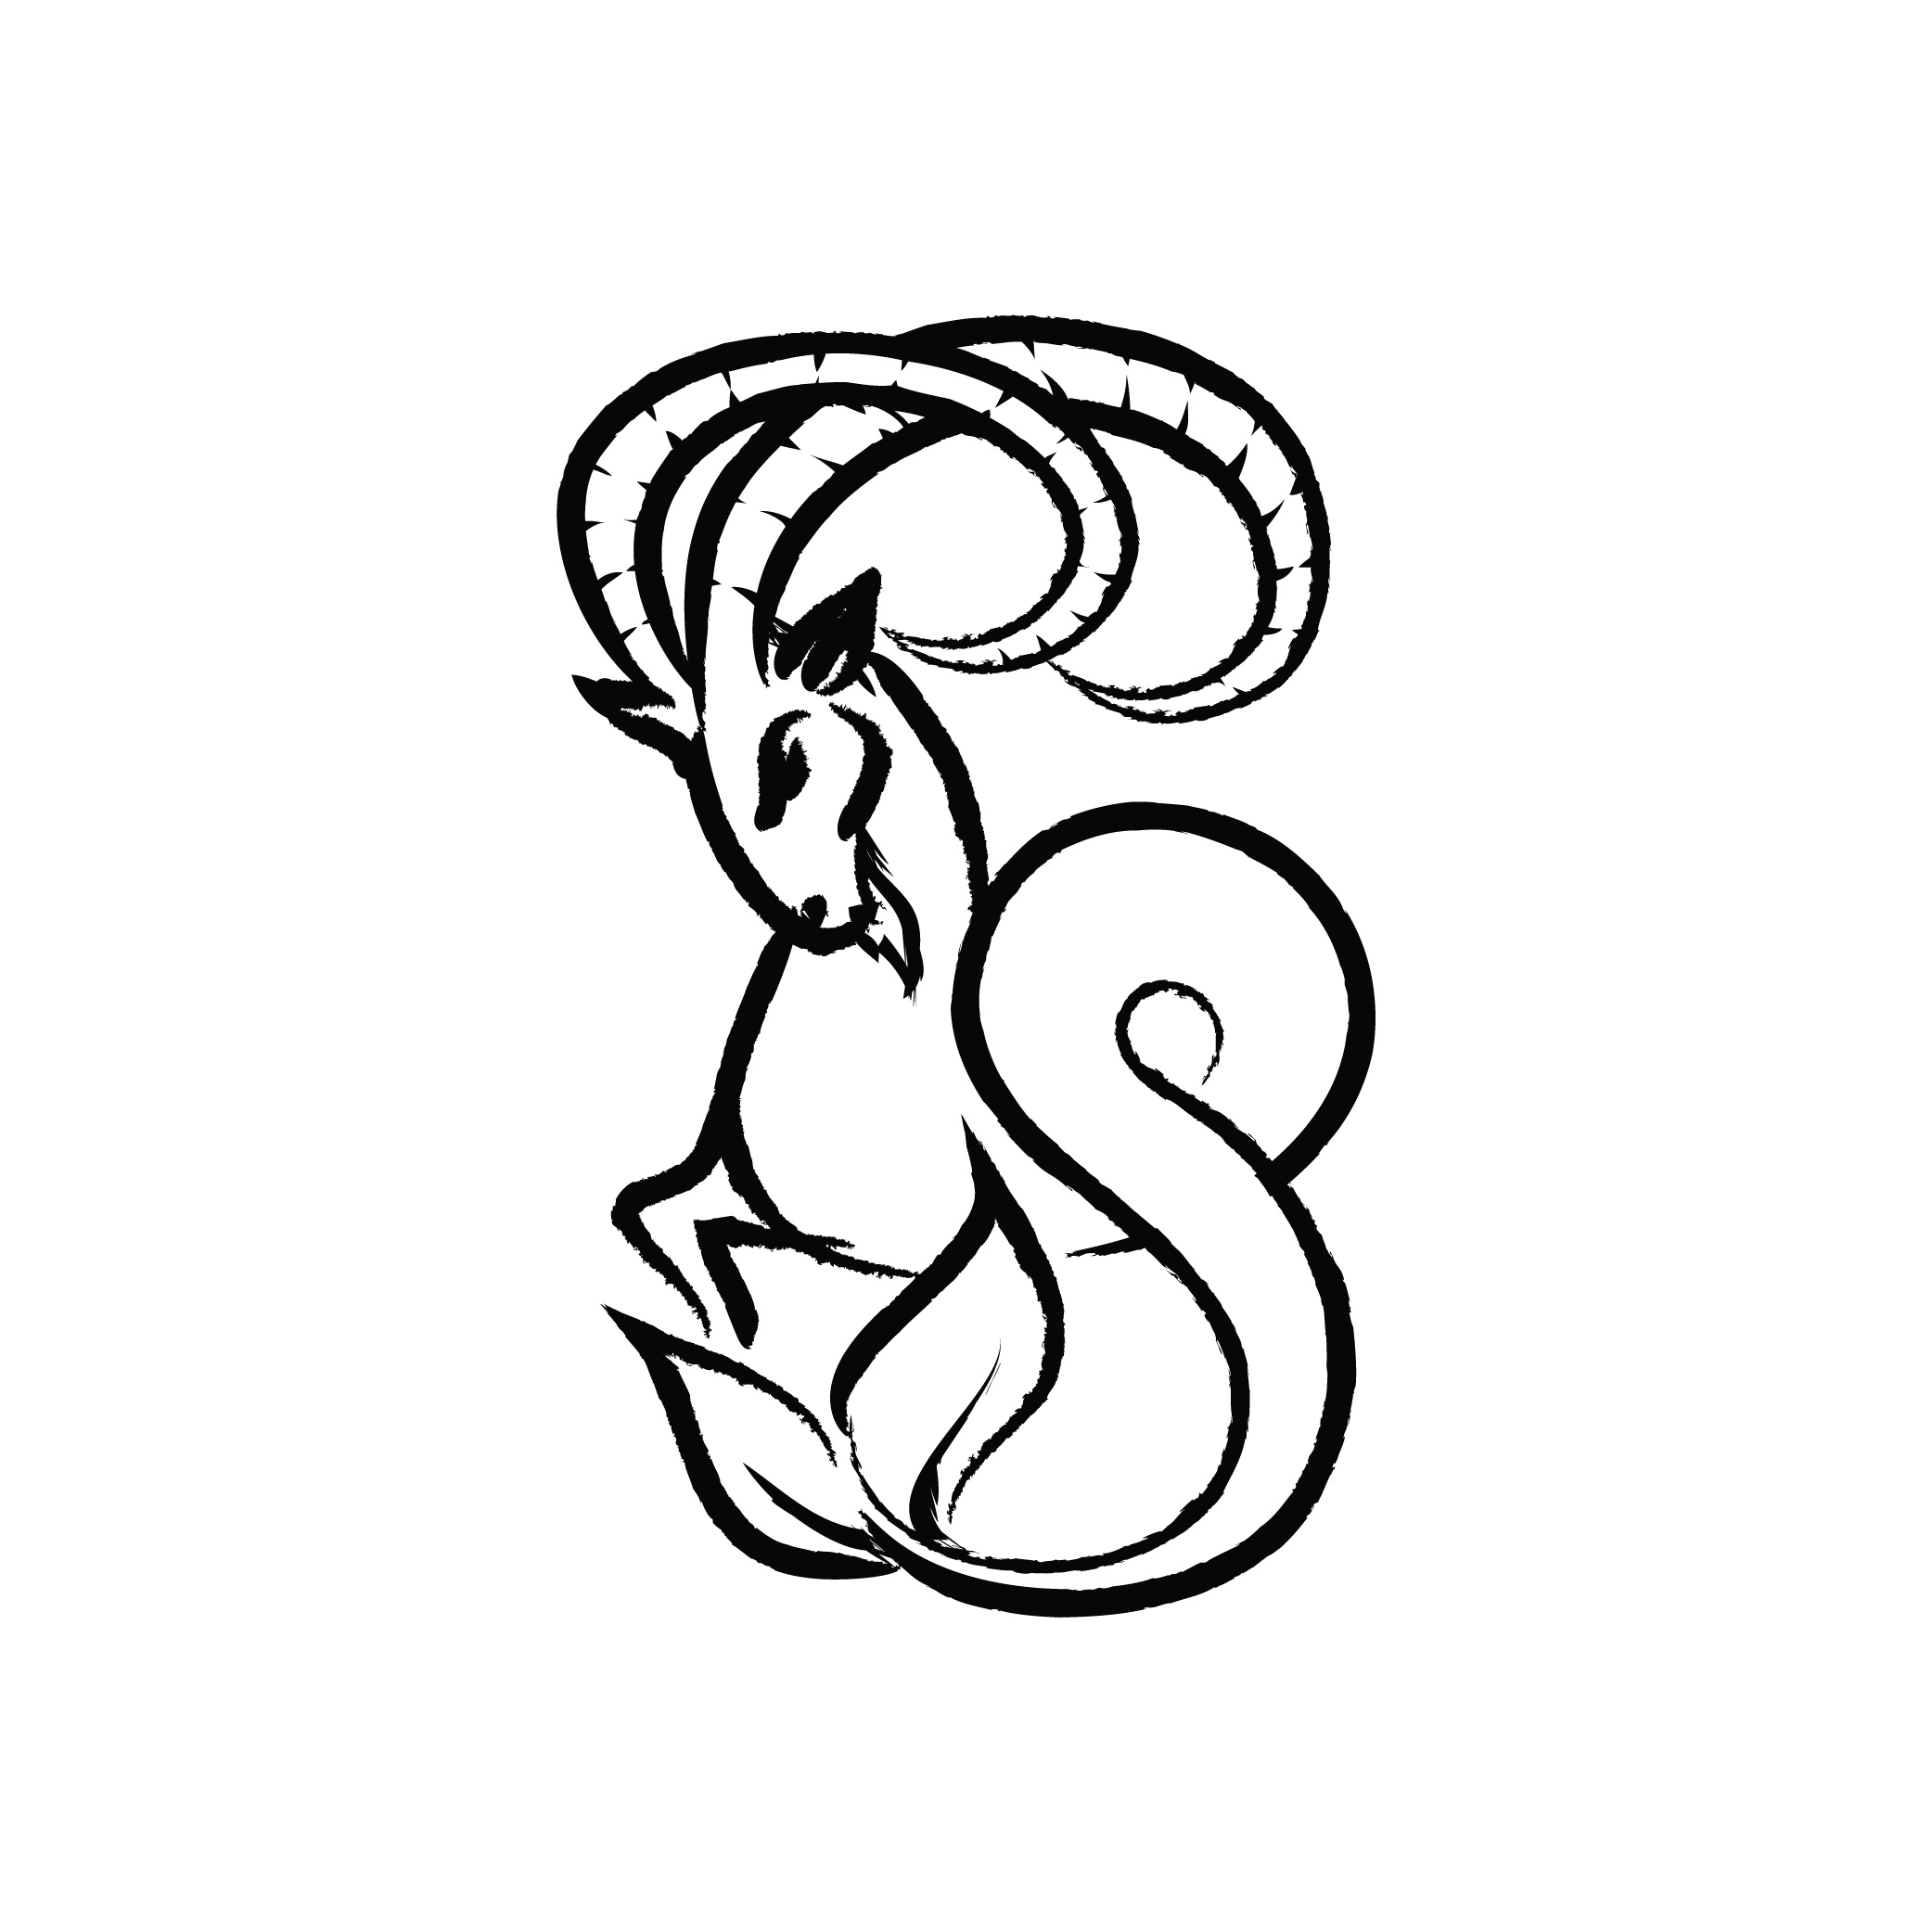 Transparent capricorn images, Free download, Proofmart collection, 2090x2090 HD Handy